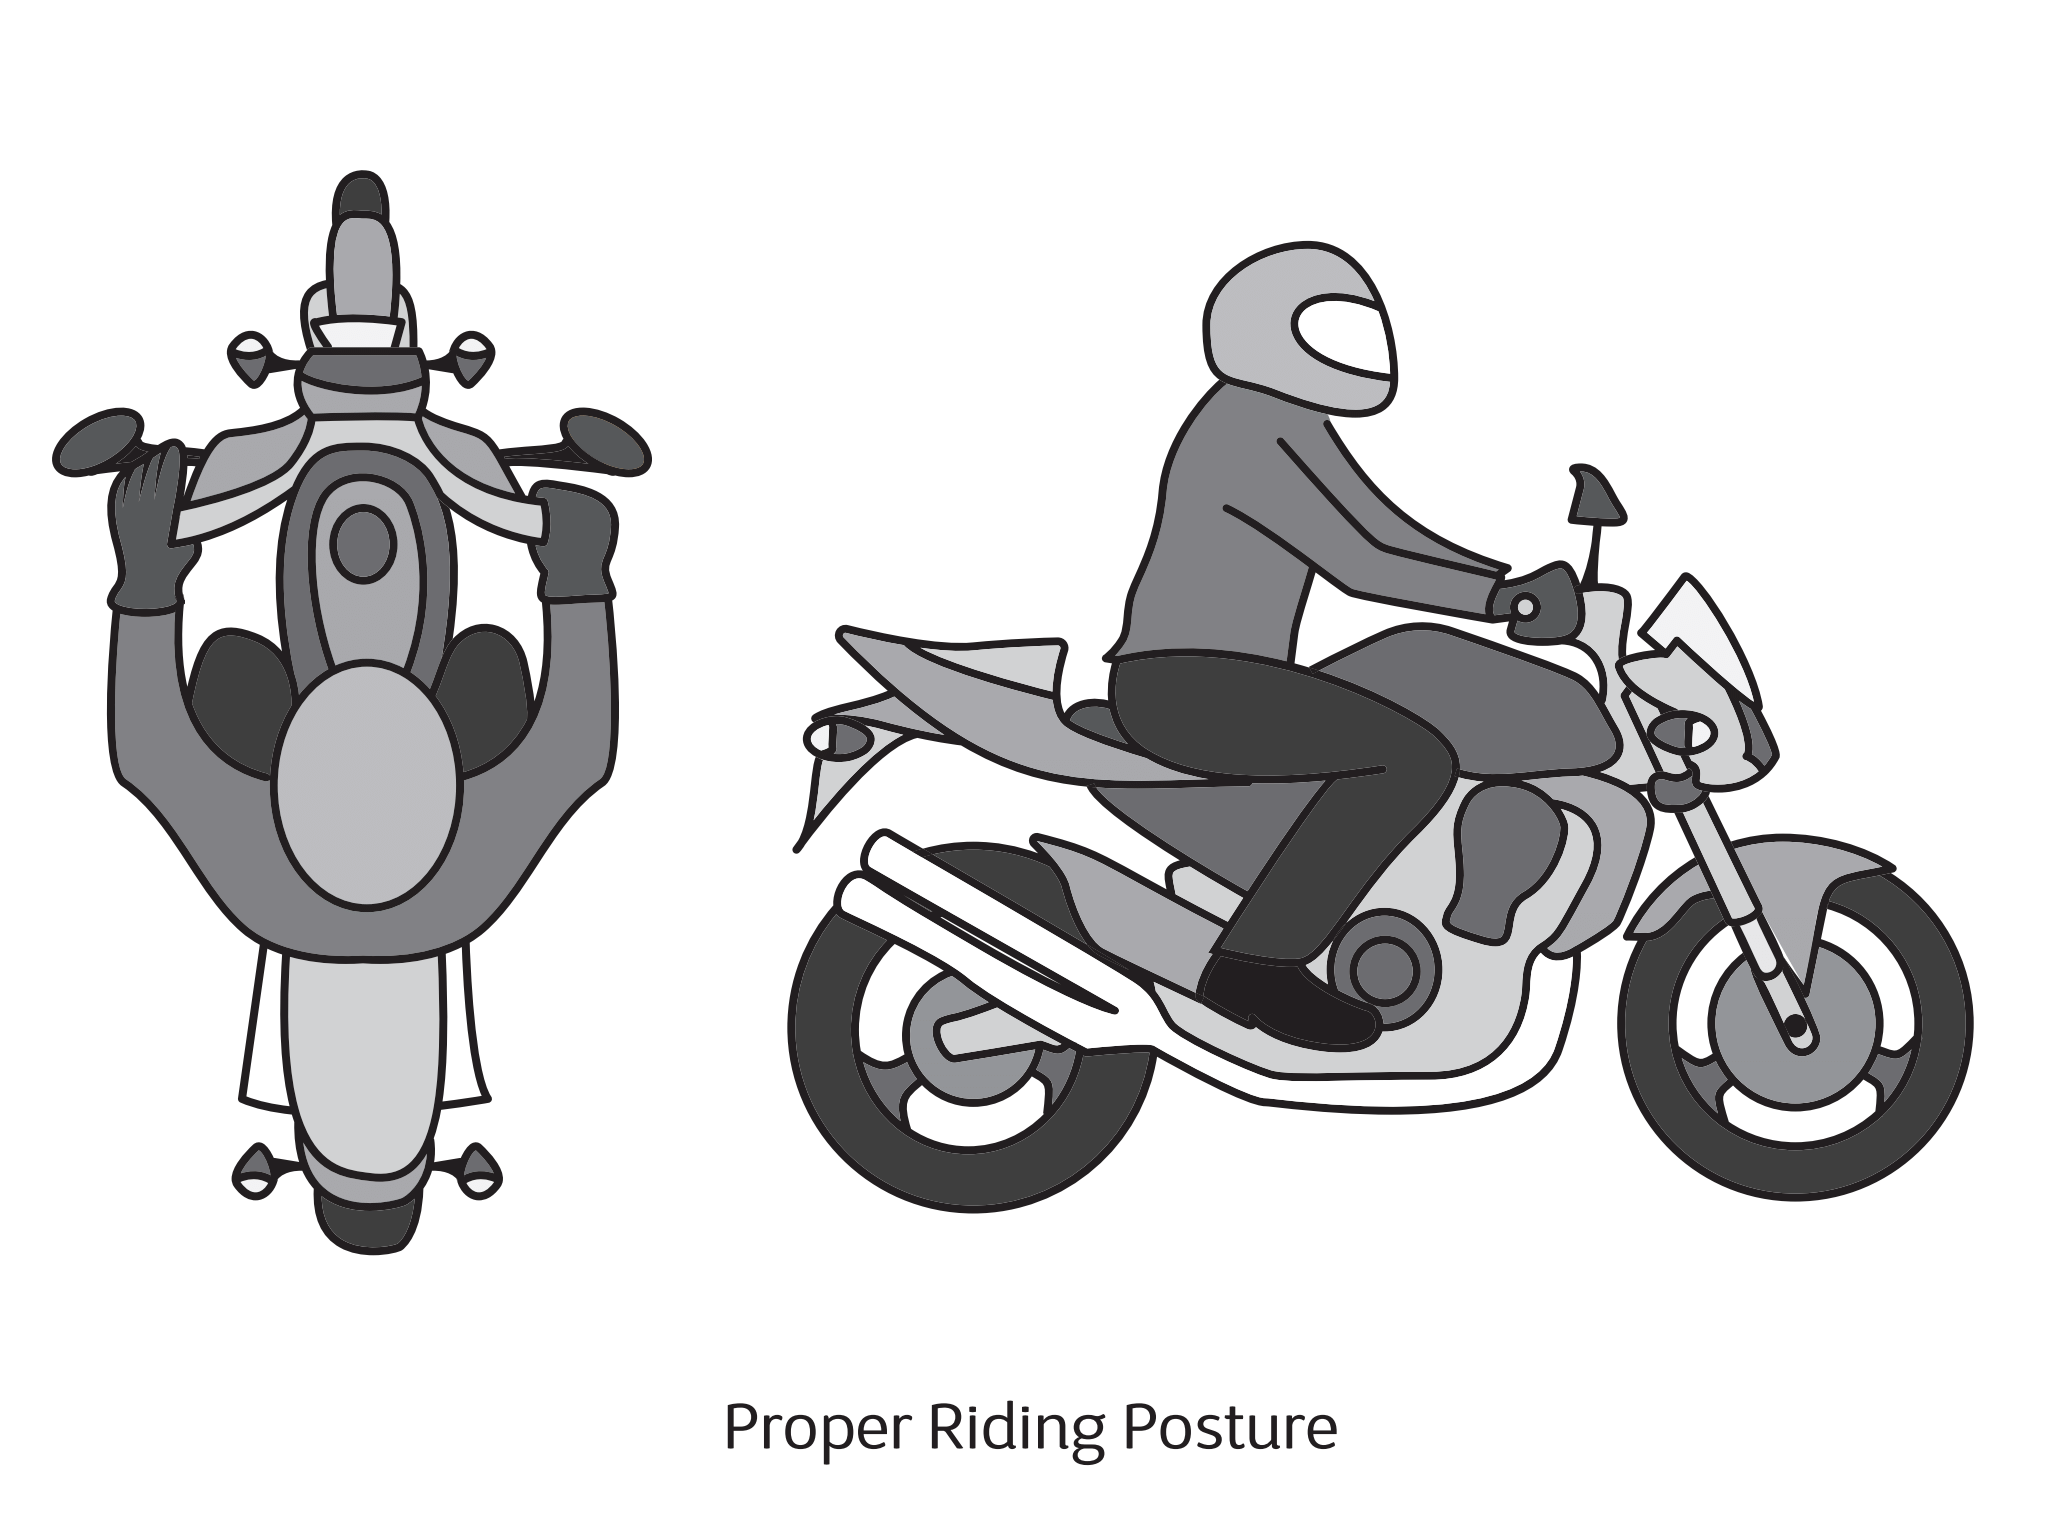 image of proper riding posture on a motorccycle